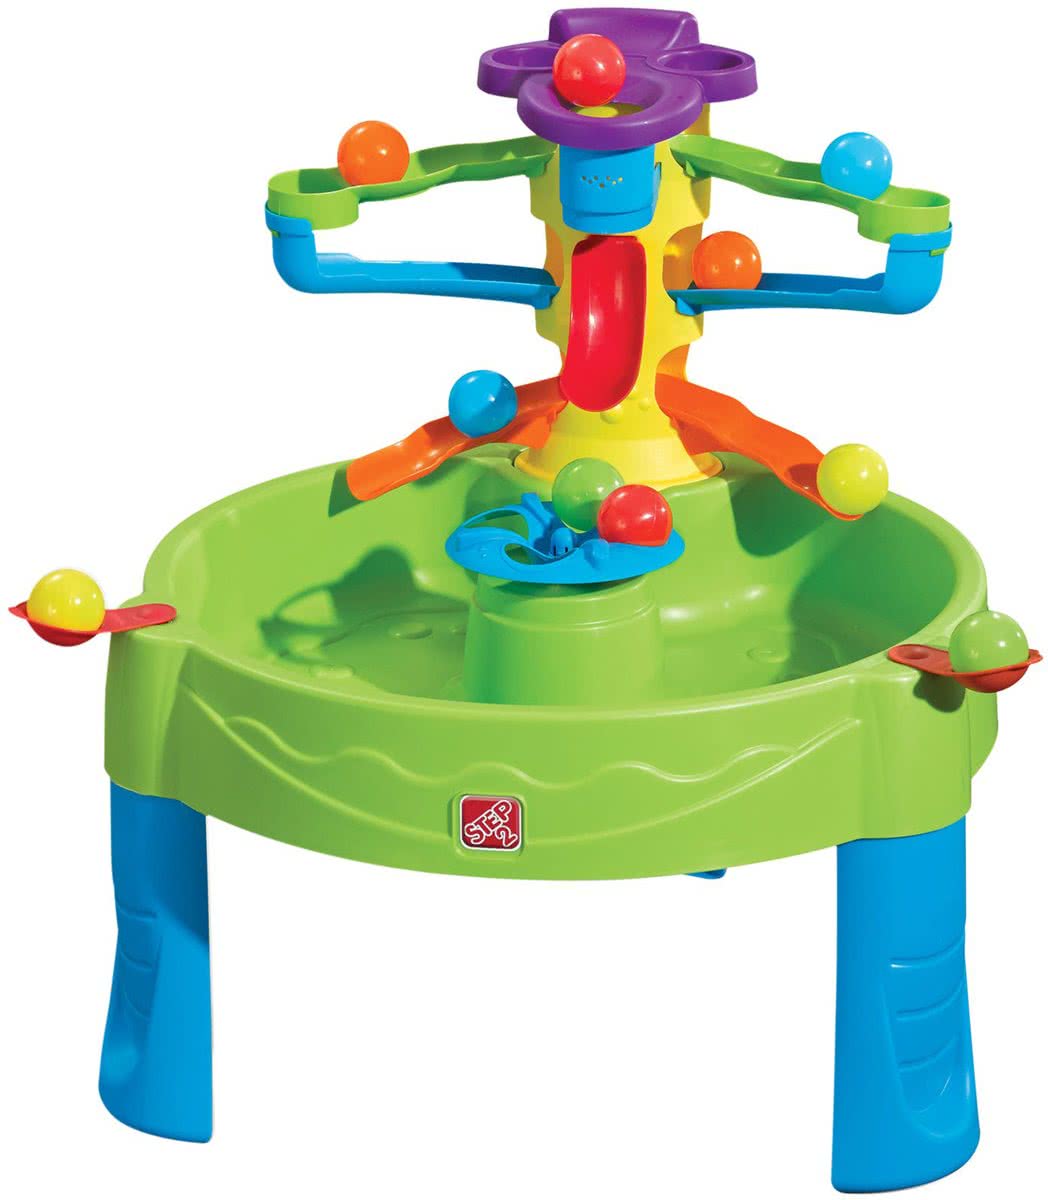 Step2 Busy Ball Play Table - Watertafel